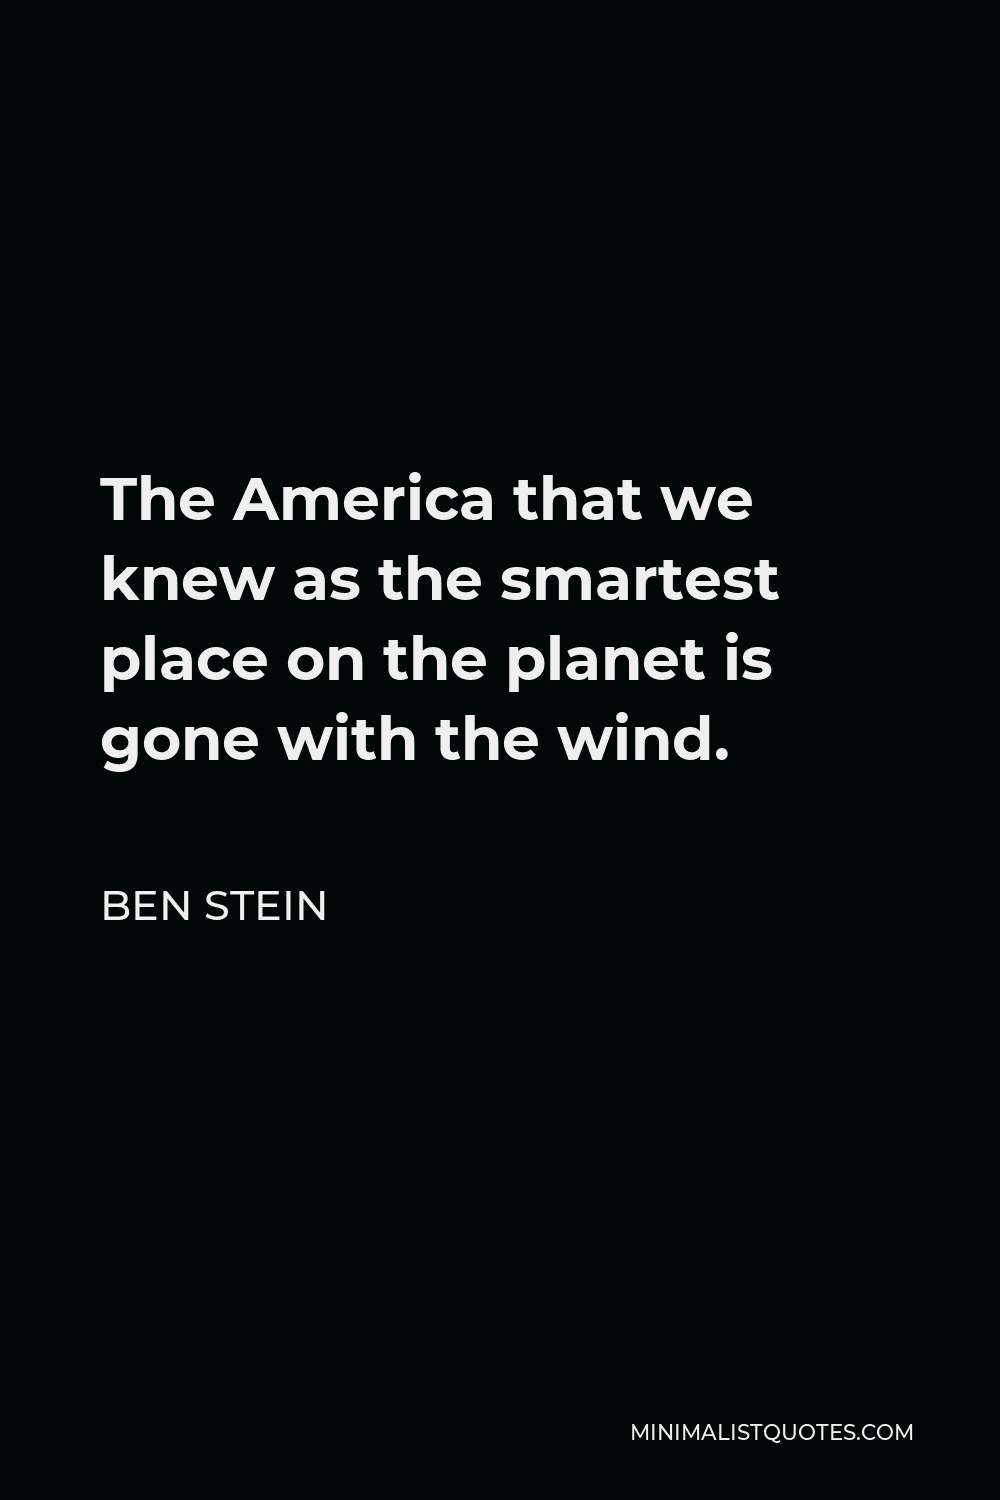 Ben Stein Quote - The America that we knew as the smartest place on the planet is gone with the wind.